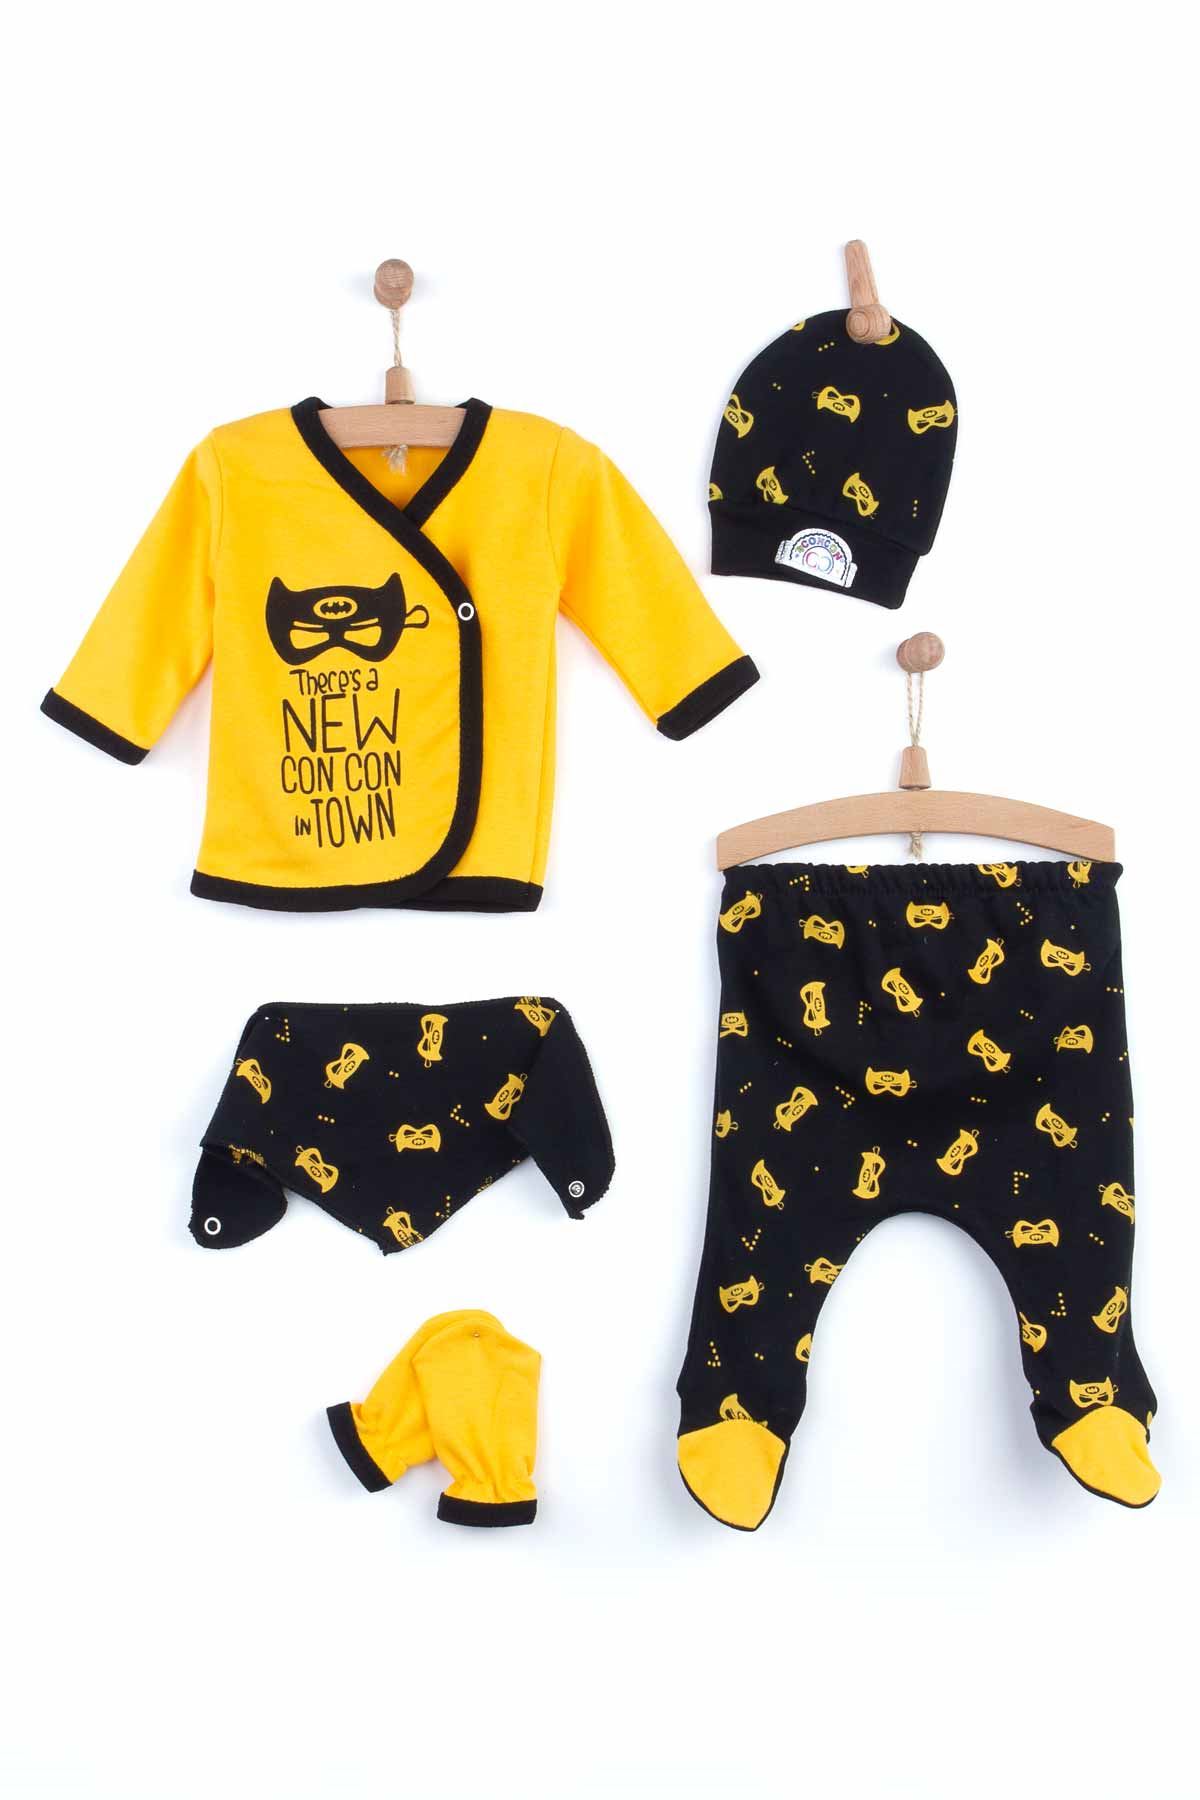 Girls Baby Boy Newborn Clothing 5-Piece set Cotton Fabric Batman Boys Babies Summer Clothes Gift Daily Casual Stylish outfit Mod